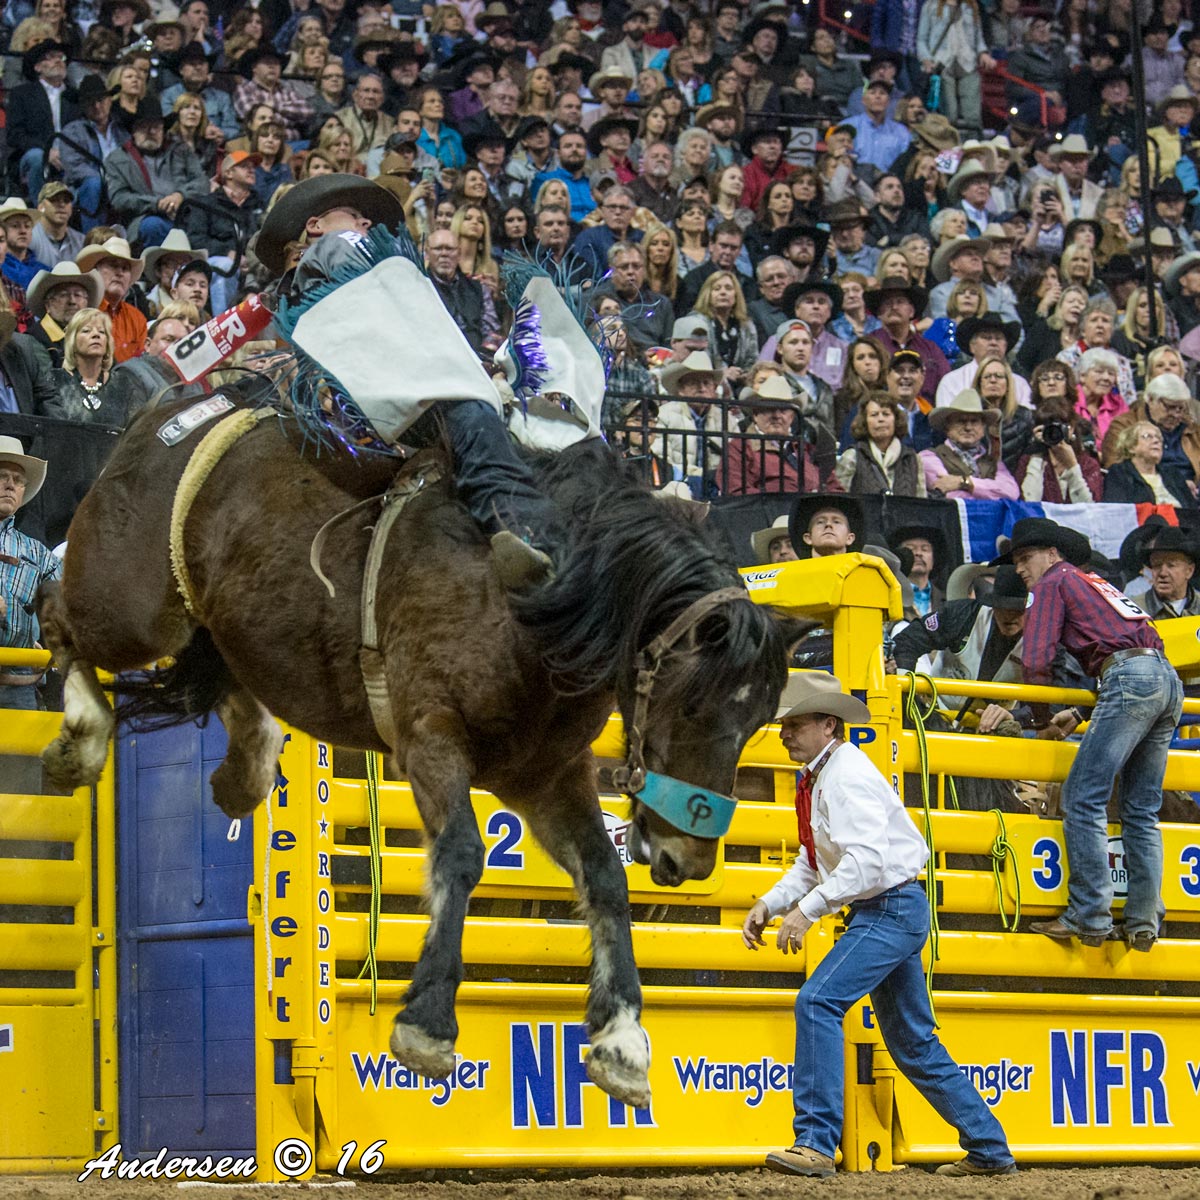 RC Landingham on Scarlet Fever (Pickett Rodeo) with a 84.5 ride during Round 7 of WNFR16